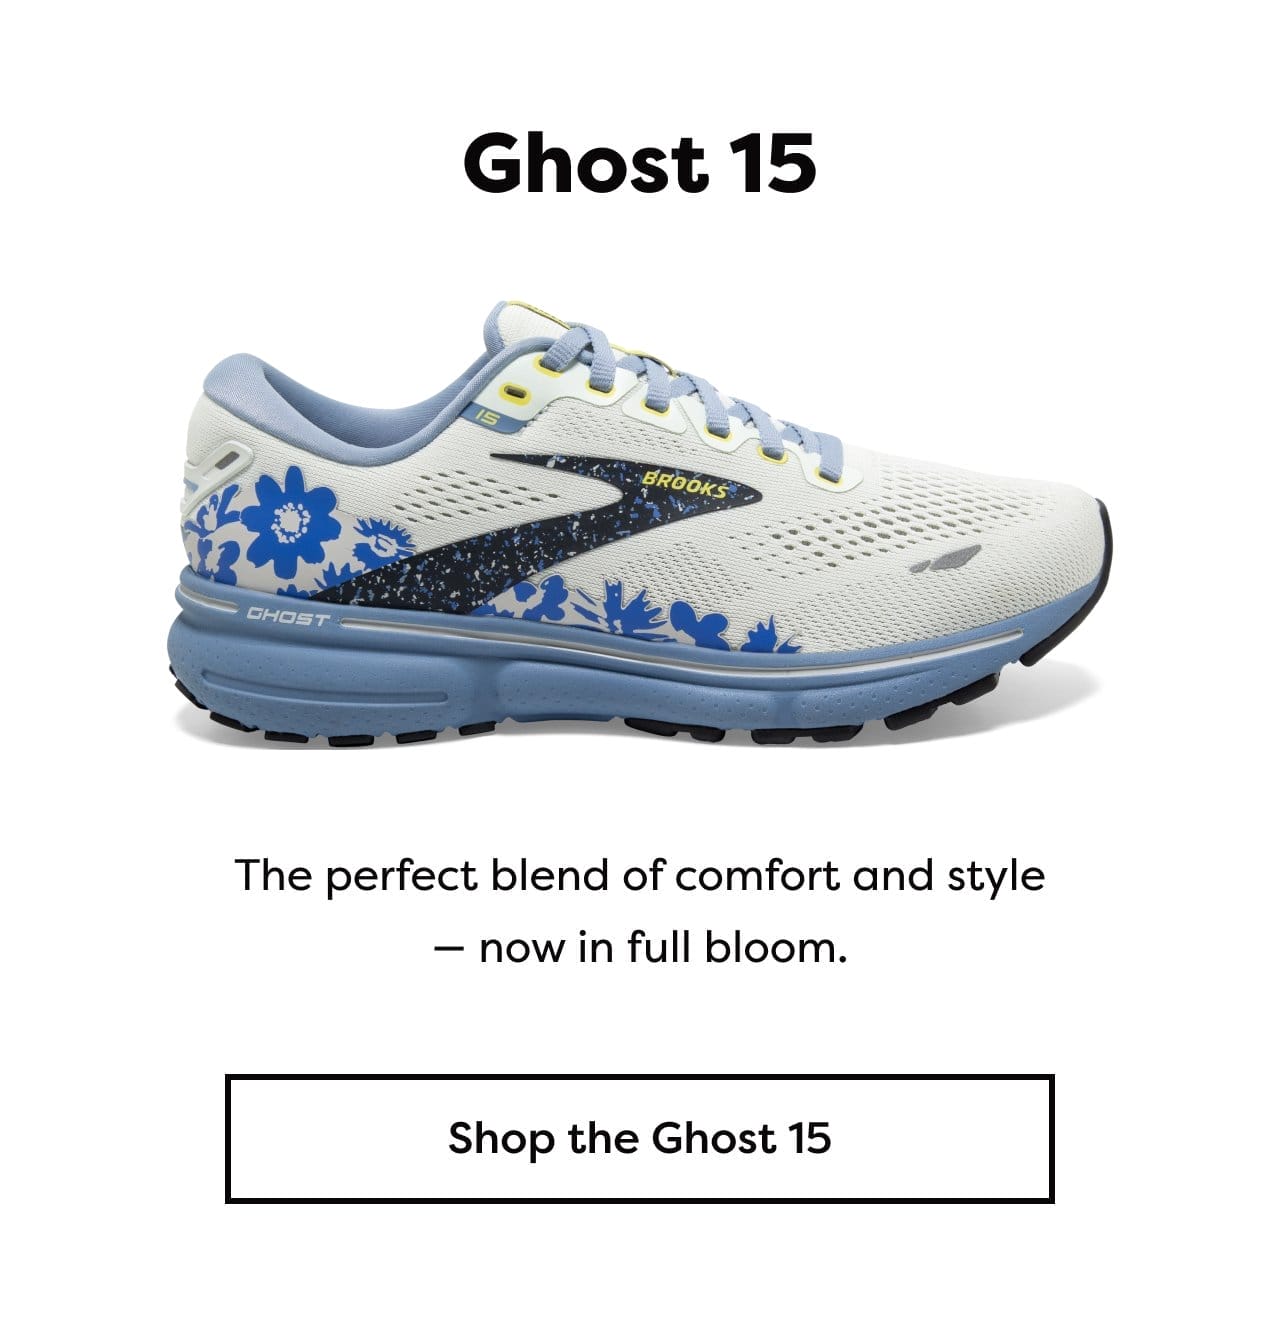 Ghost 15 - The perfect blend of comfort and style - now in full bloom. | Shop the Ghost 15